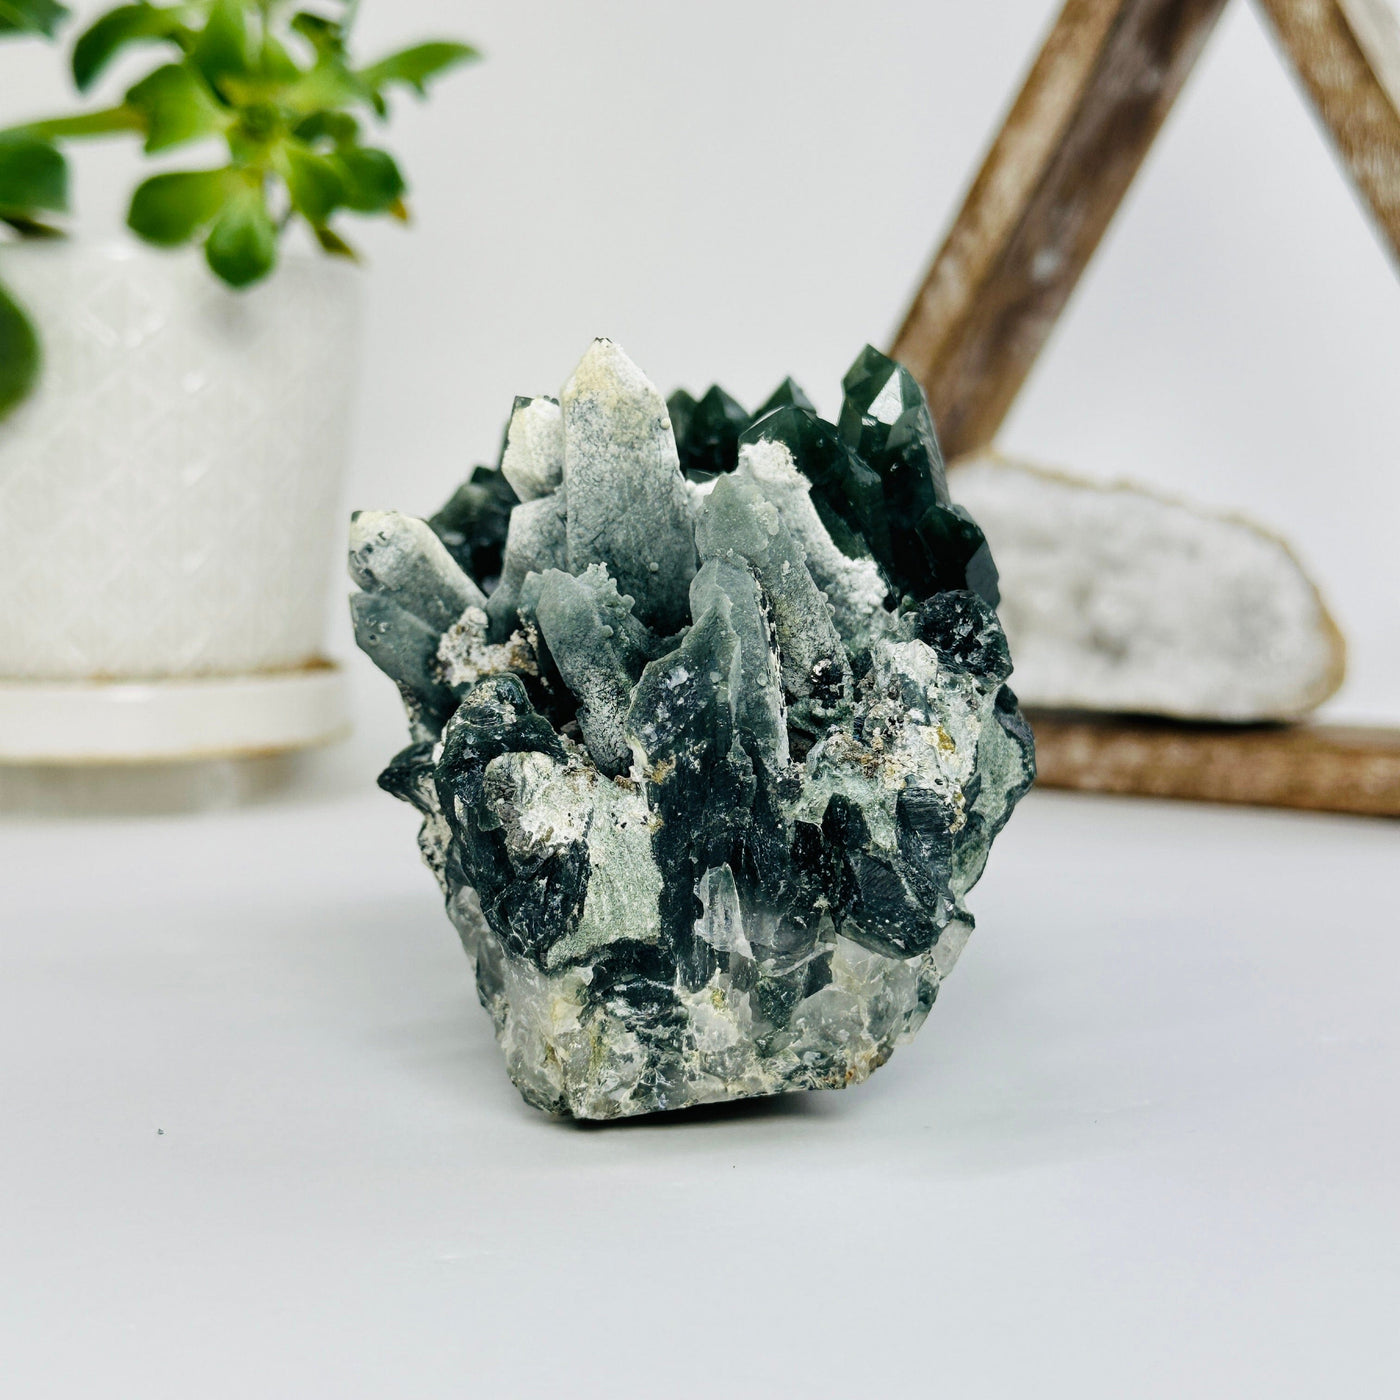 hedenbergite cluster with decorations in the background